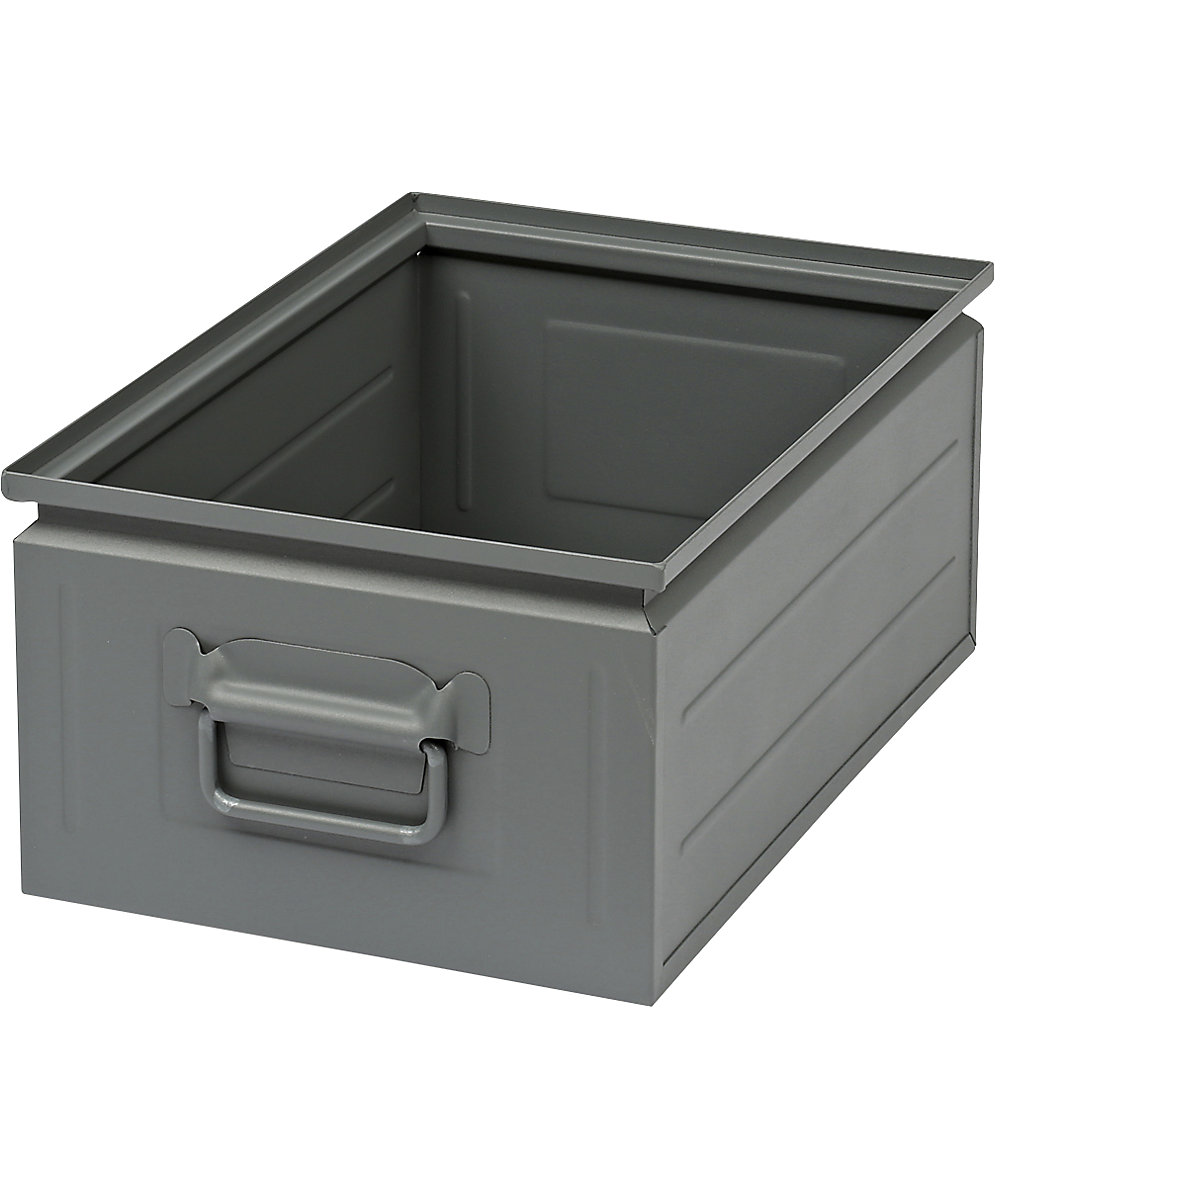 Stacking container made of sheet steel, capacity approx. 25 l, basalt grey RAL 7012-6